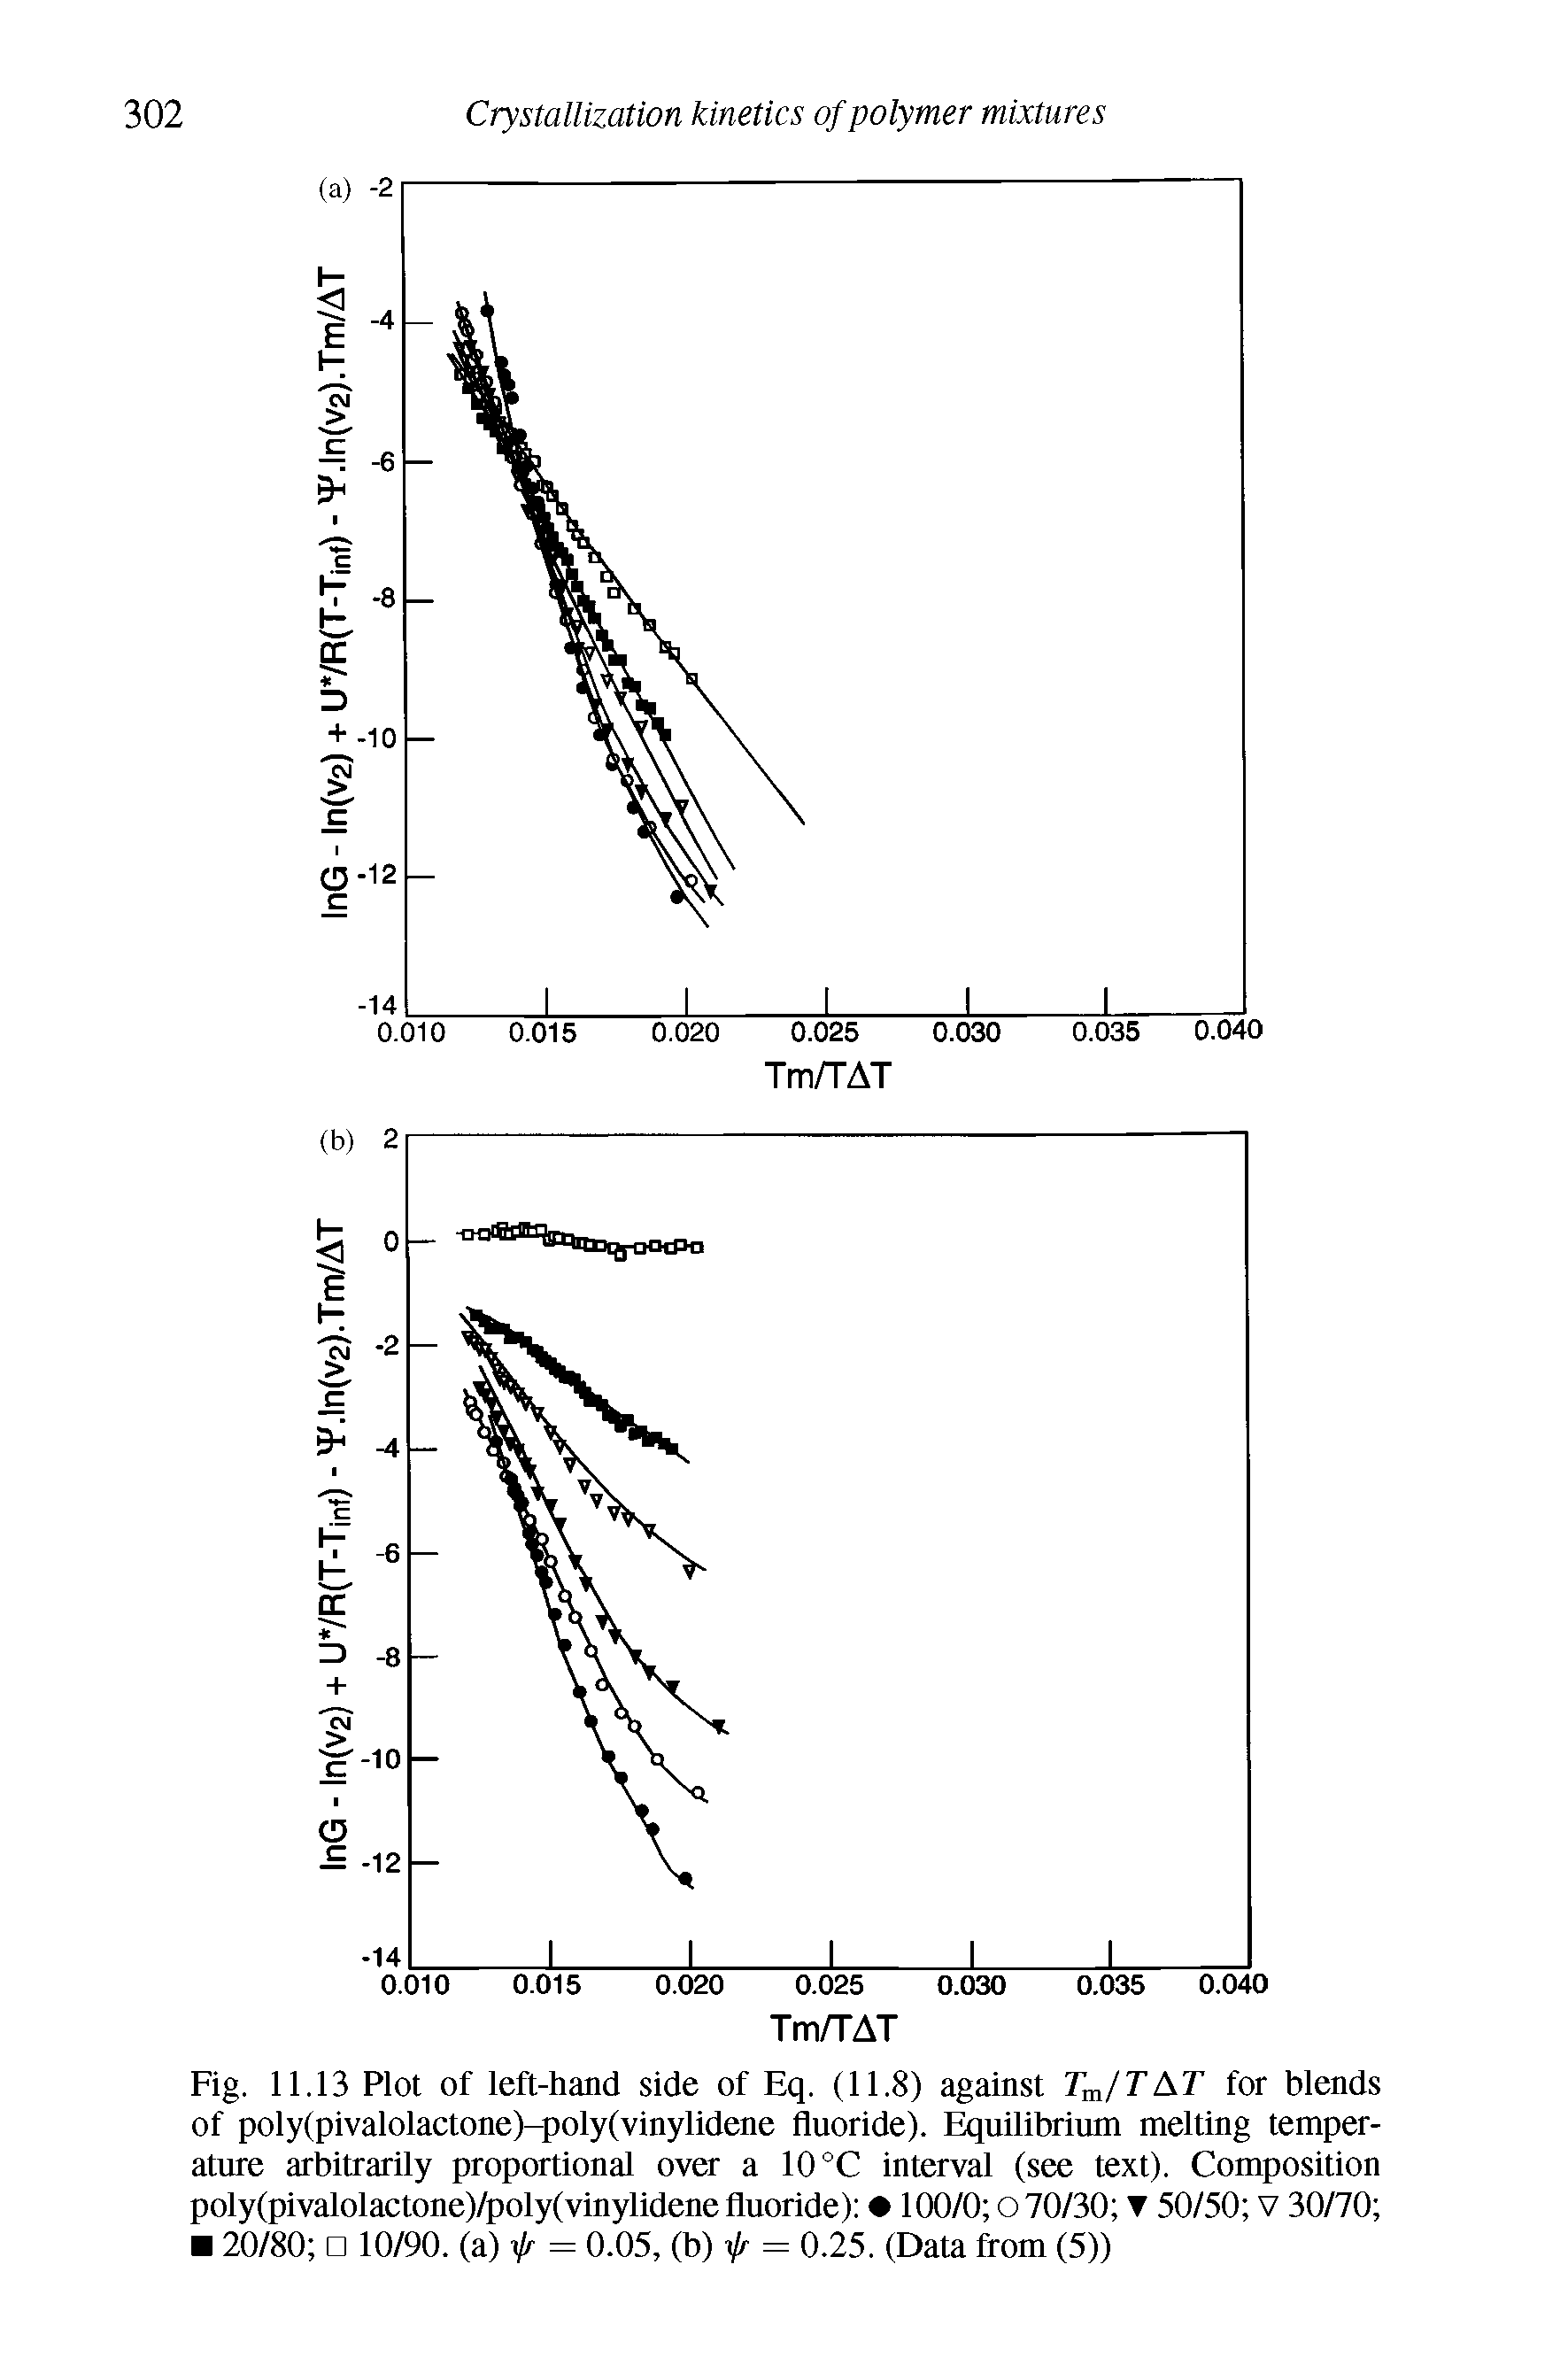 Fig. 11.13 Plot of left-hand side of Eq. (11.8) against Tja/TAT for blends of poly(pivalolactone>q)oly(vinylidene fluoride Equilibrium melting temperature arbitrarily proportional over a 10 °C interval (see text). Composition poly(pivalolactone)/poly(vinylidene fluoride) 100/0 o 70/30 T 50/50 v 30/70 20/80 10/90. (a) f = 0.05, (b)f = 0.25. (Data from (5))...